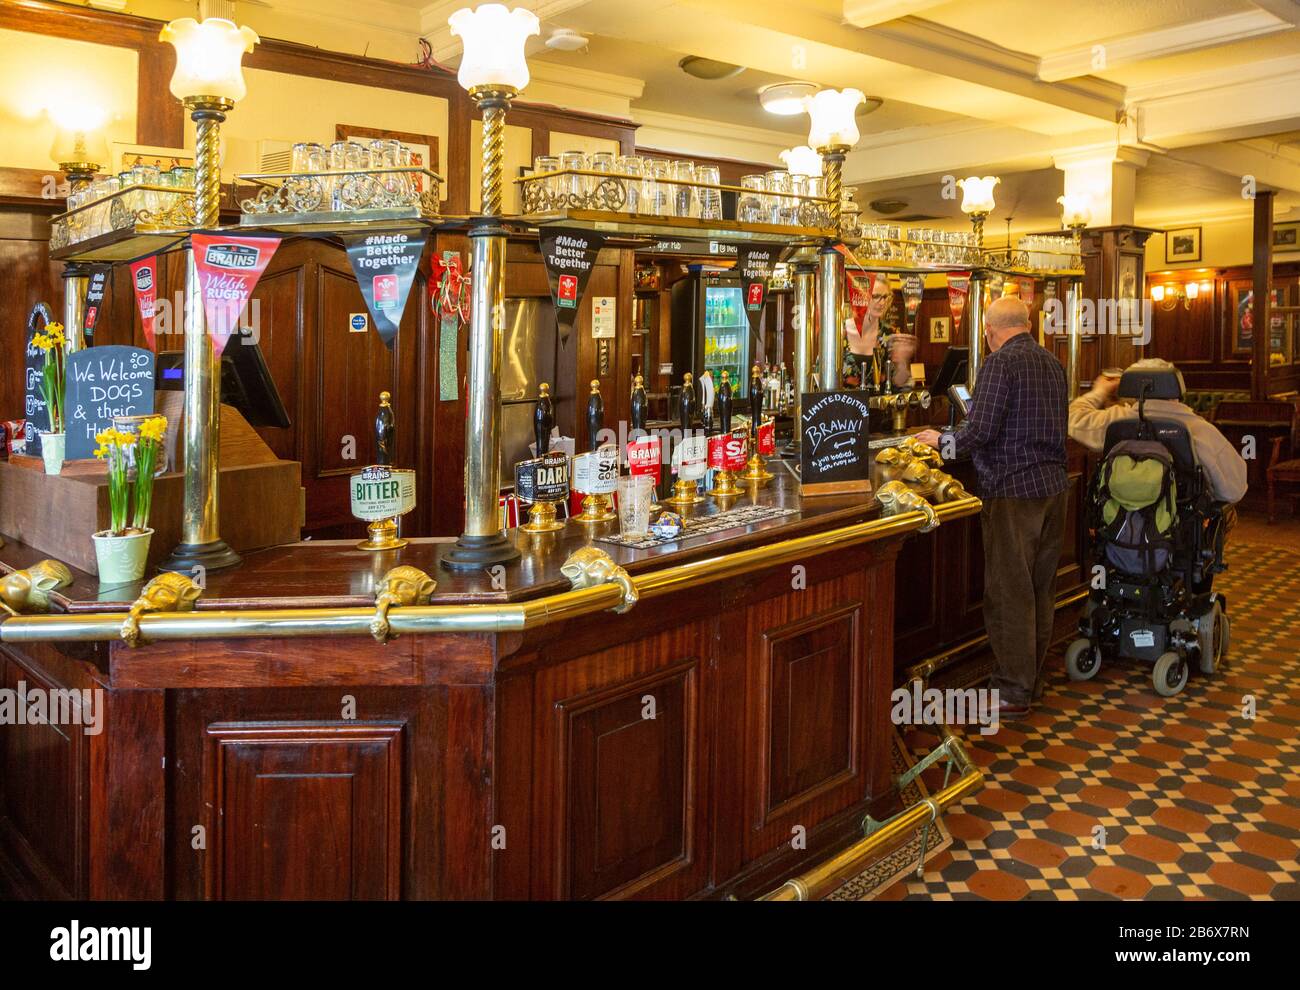 Interior of historic Goat Major pub in city centre of Cardiff, South Wales, UK - bar with Brains beers on sale Stock Photo